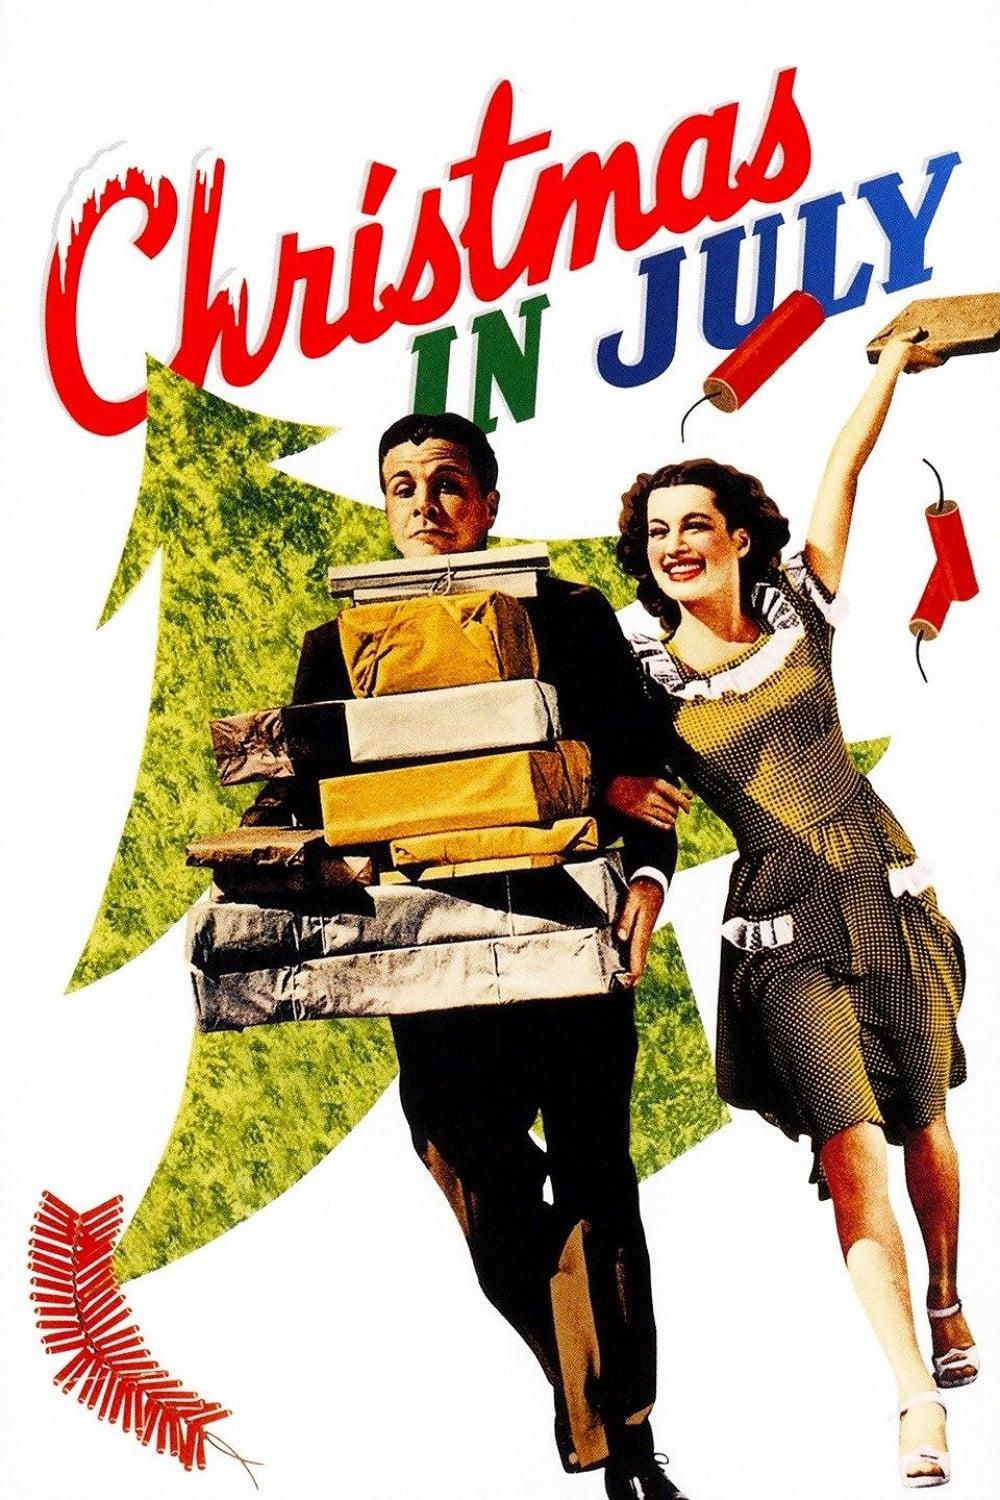 Christmas in July poster